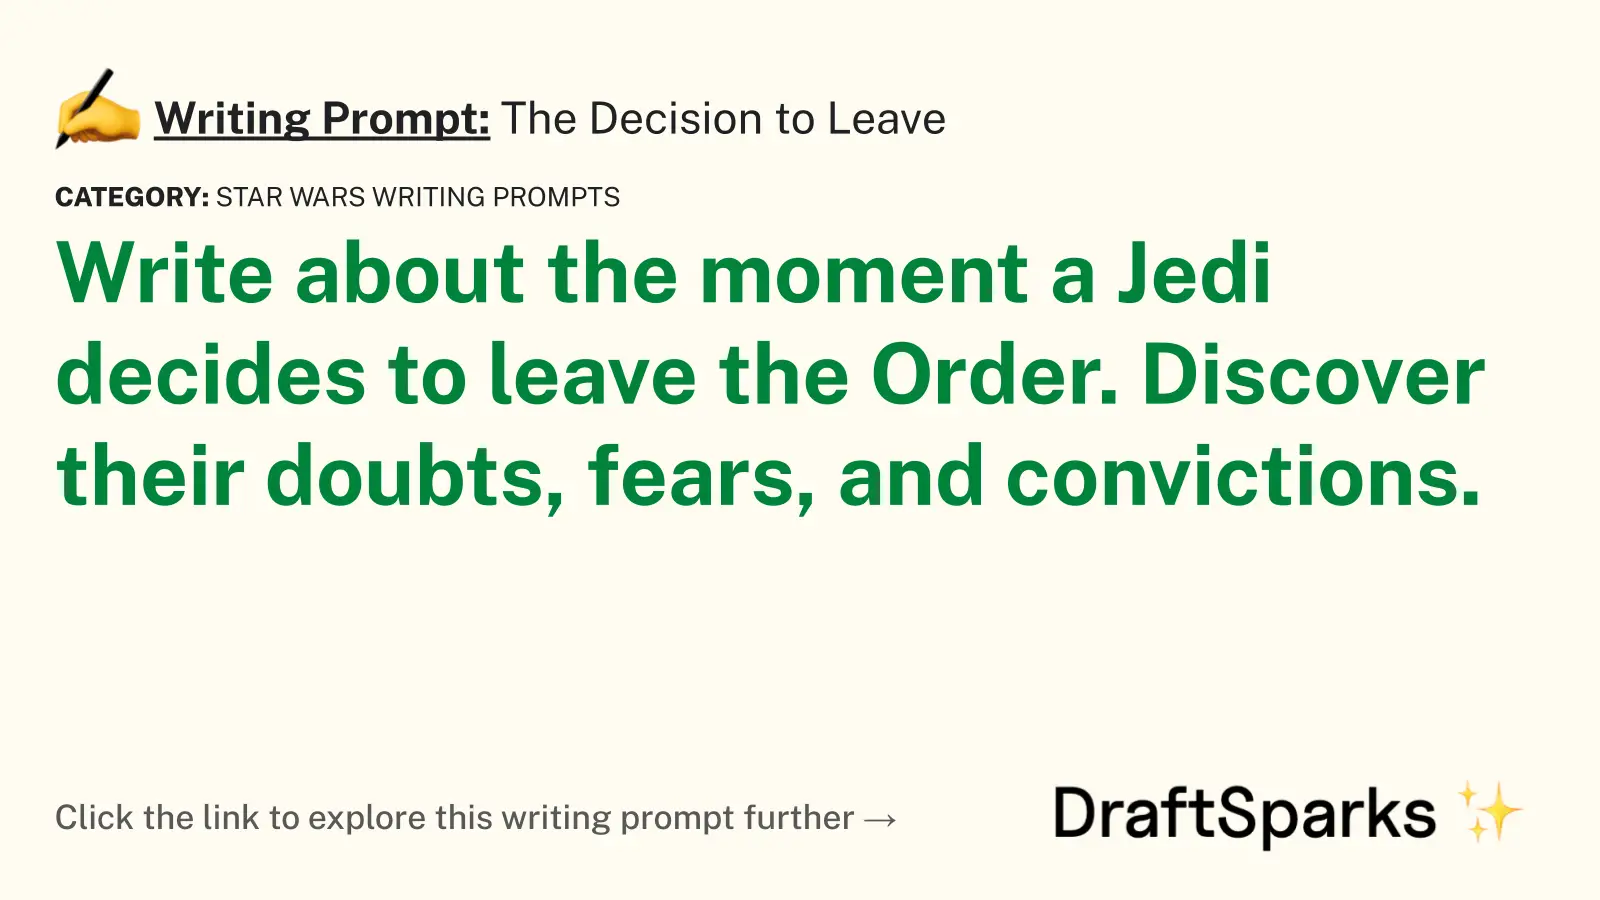 The Decision to Leave